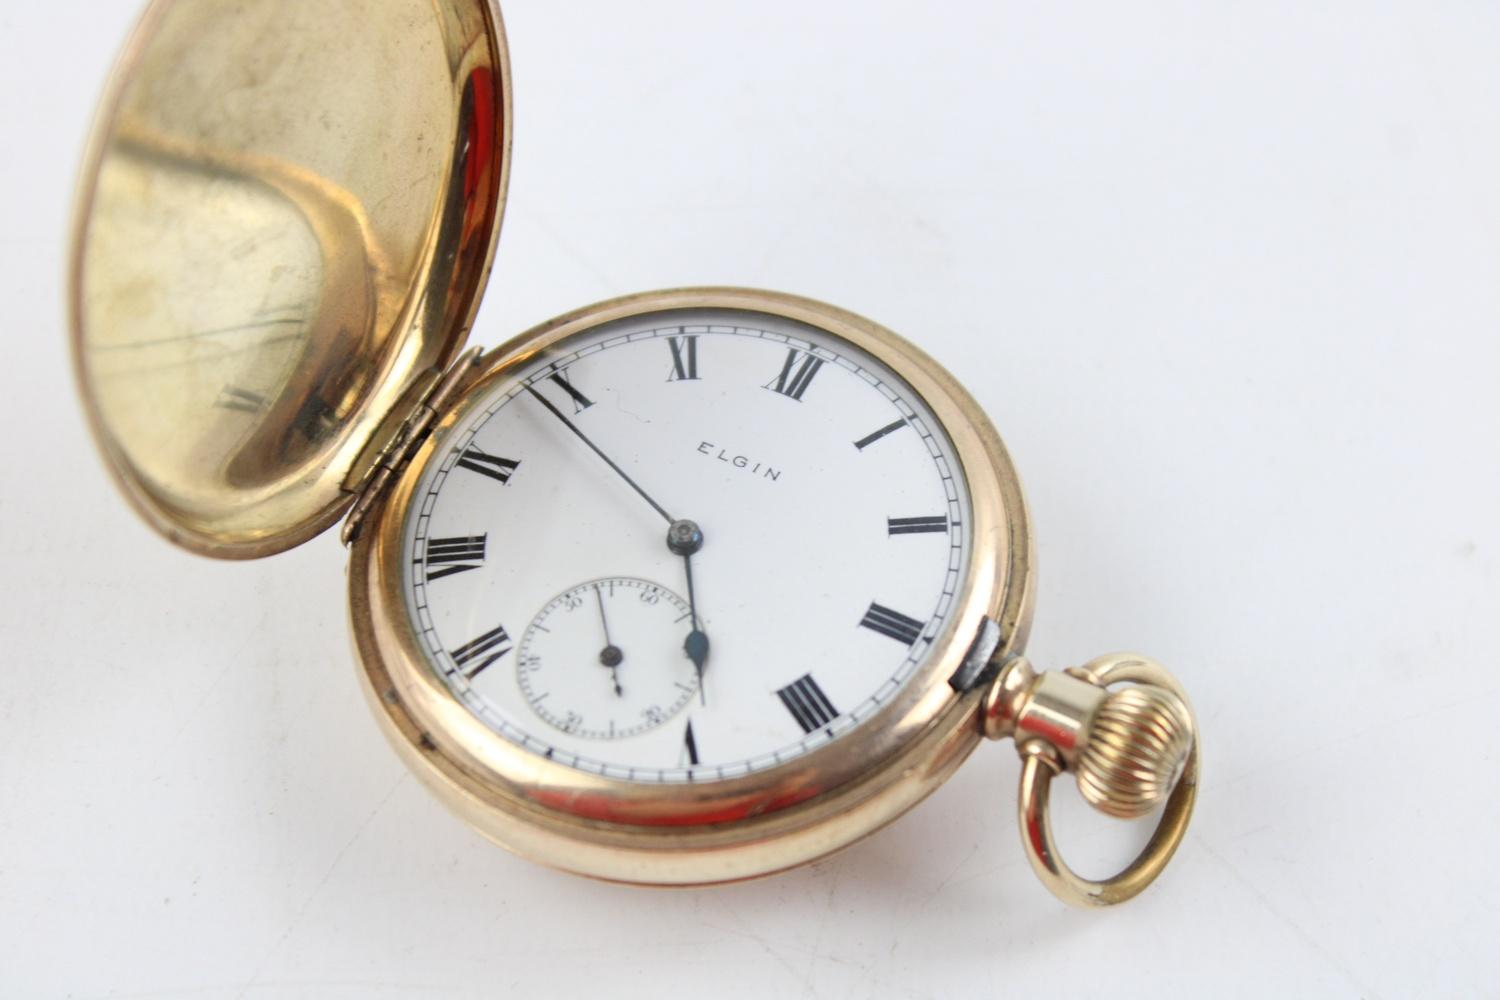 Vintage Gents ELGIN Rolled Gold Full Hinter POCKET WATCH Hand-Wind WORKING w/ 7 Jewel Movement - Image 2 of 3